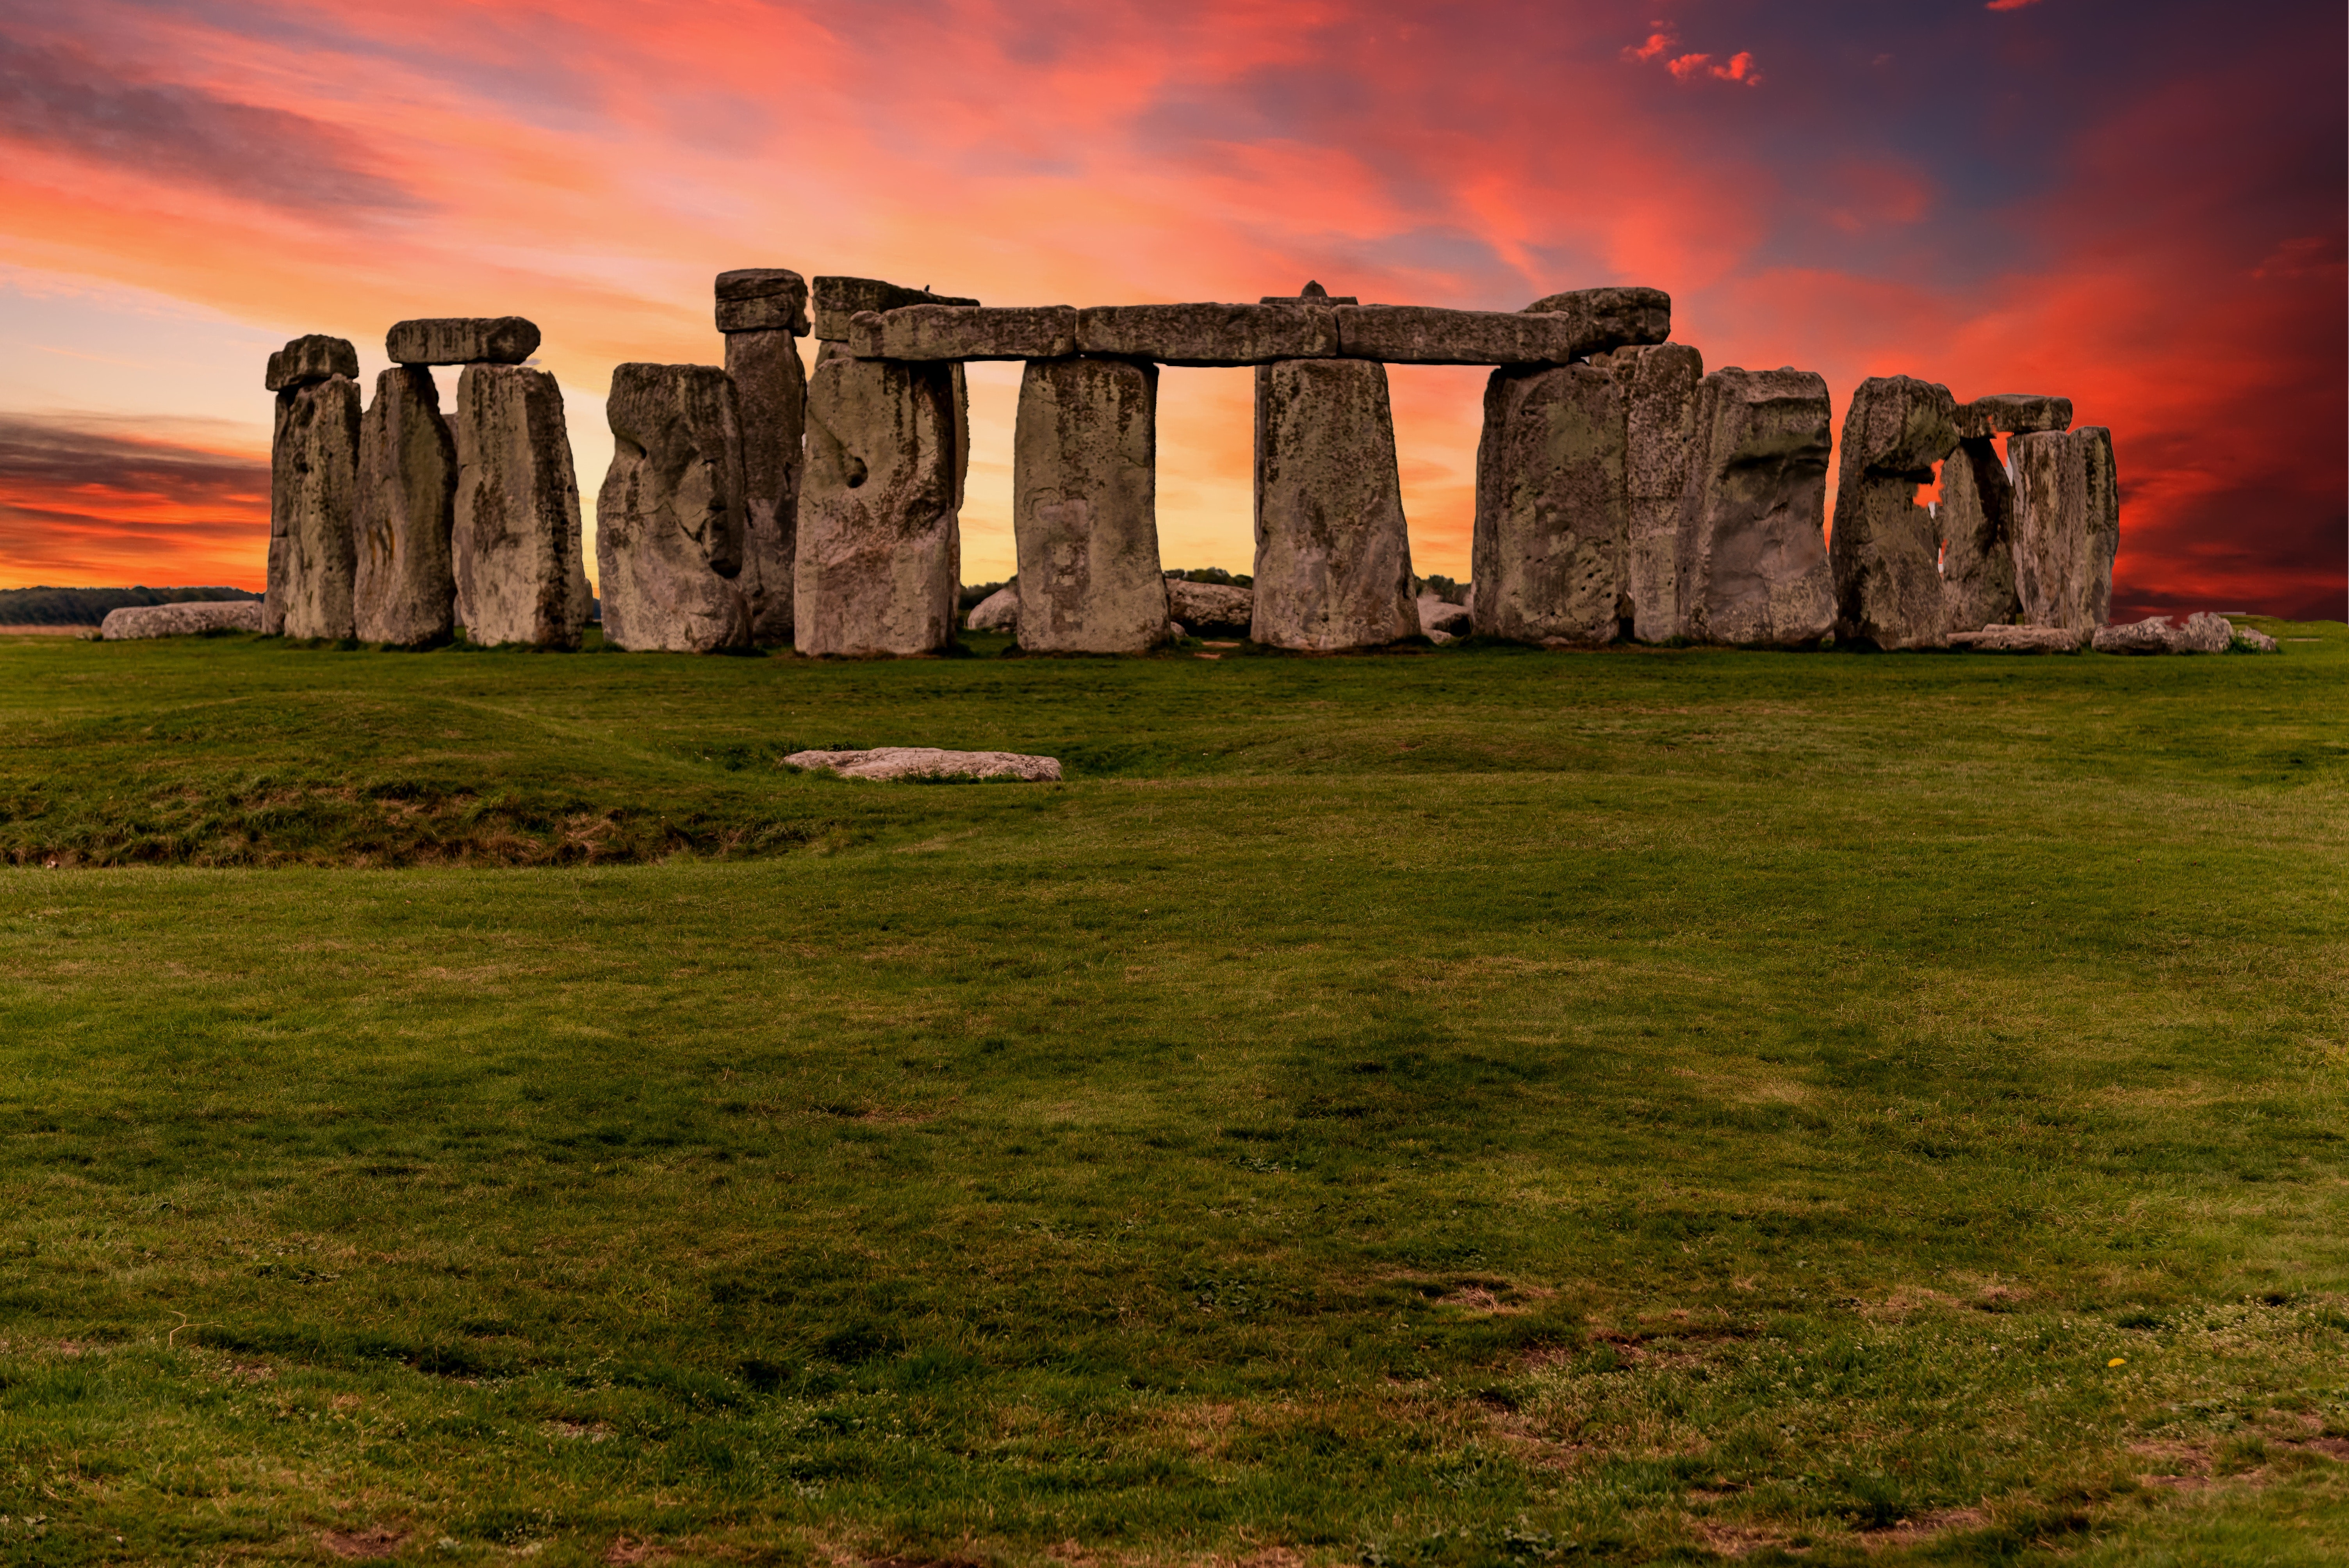 small picture of stonehenge with a pinkish sunset